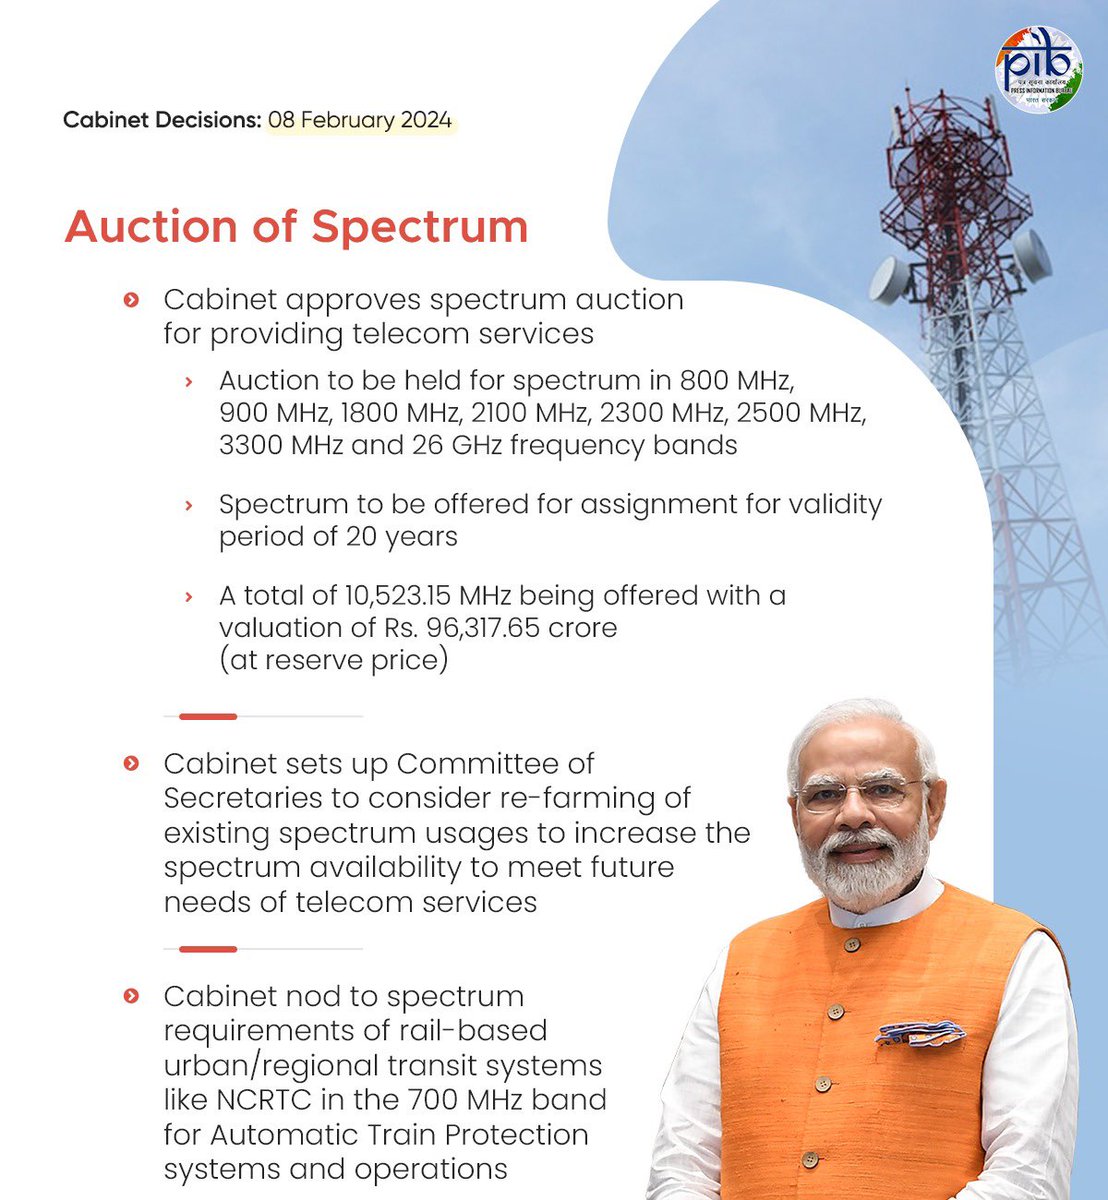 Union Cabinet approves proposal of Department of Telecommunications to conduct #SpectrumAuction for providing telecom services. Additional spectrum will improve the quality of telecom services and coverage for the consumers

#CabinetDecision